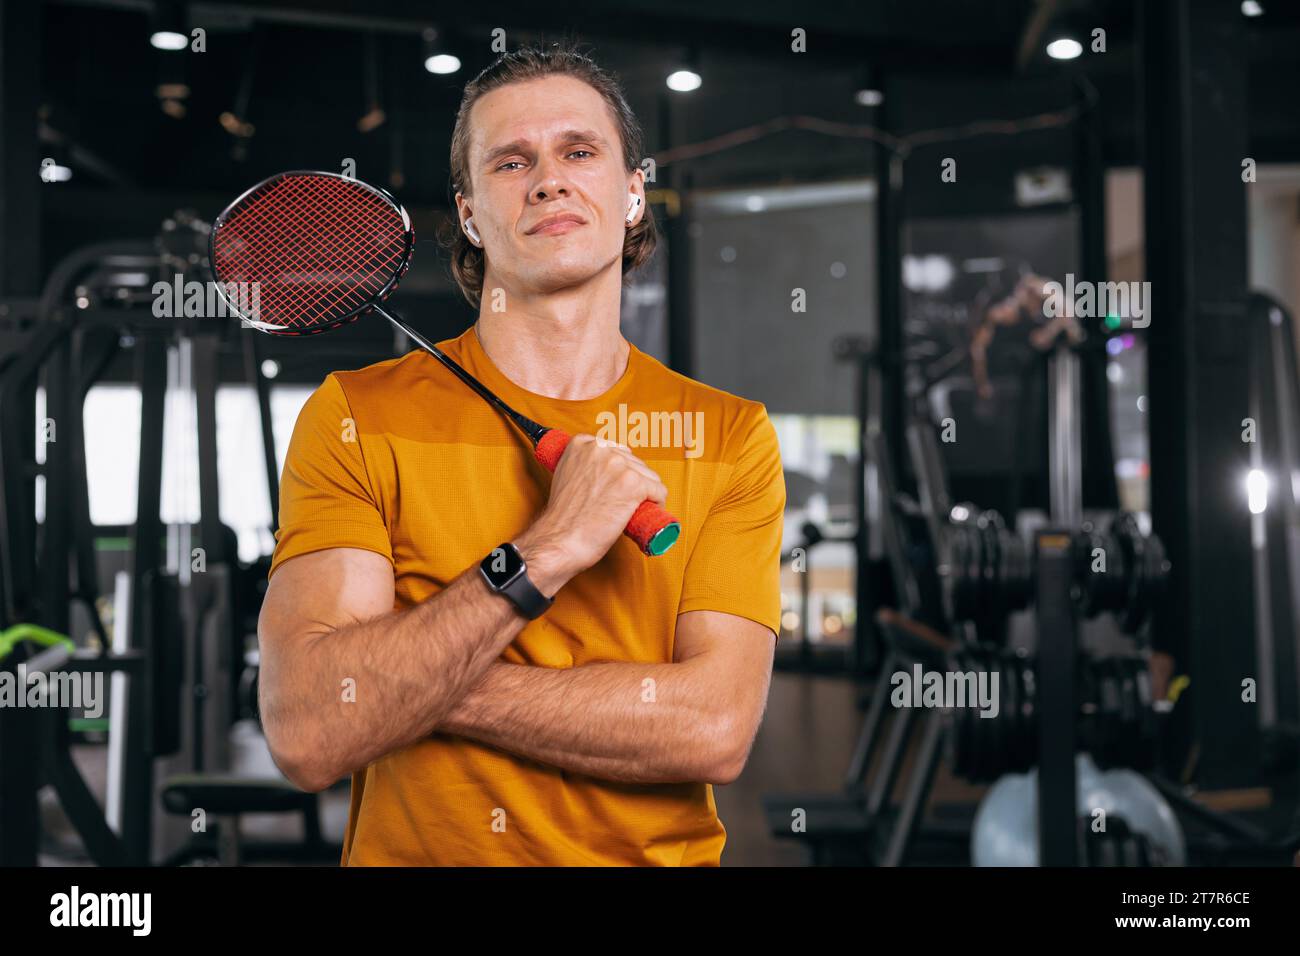 Badminton player athlete man with racket in sport studio fitness muscle training background Stock Photo